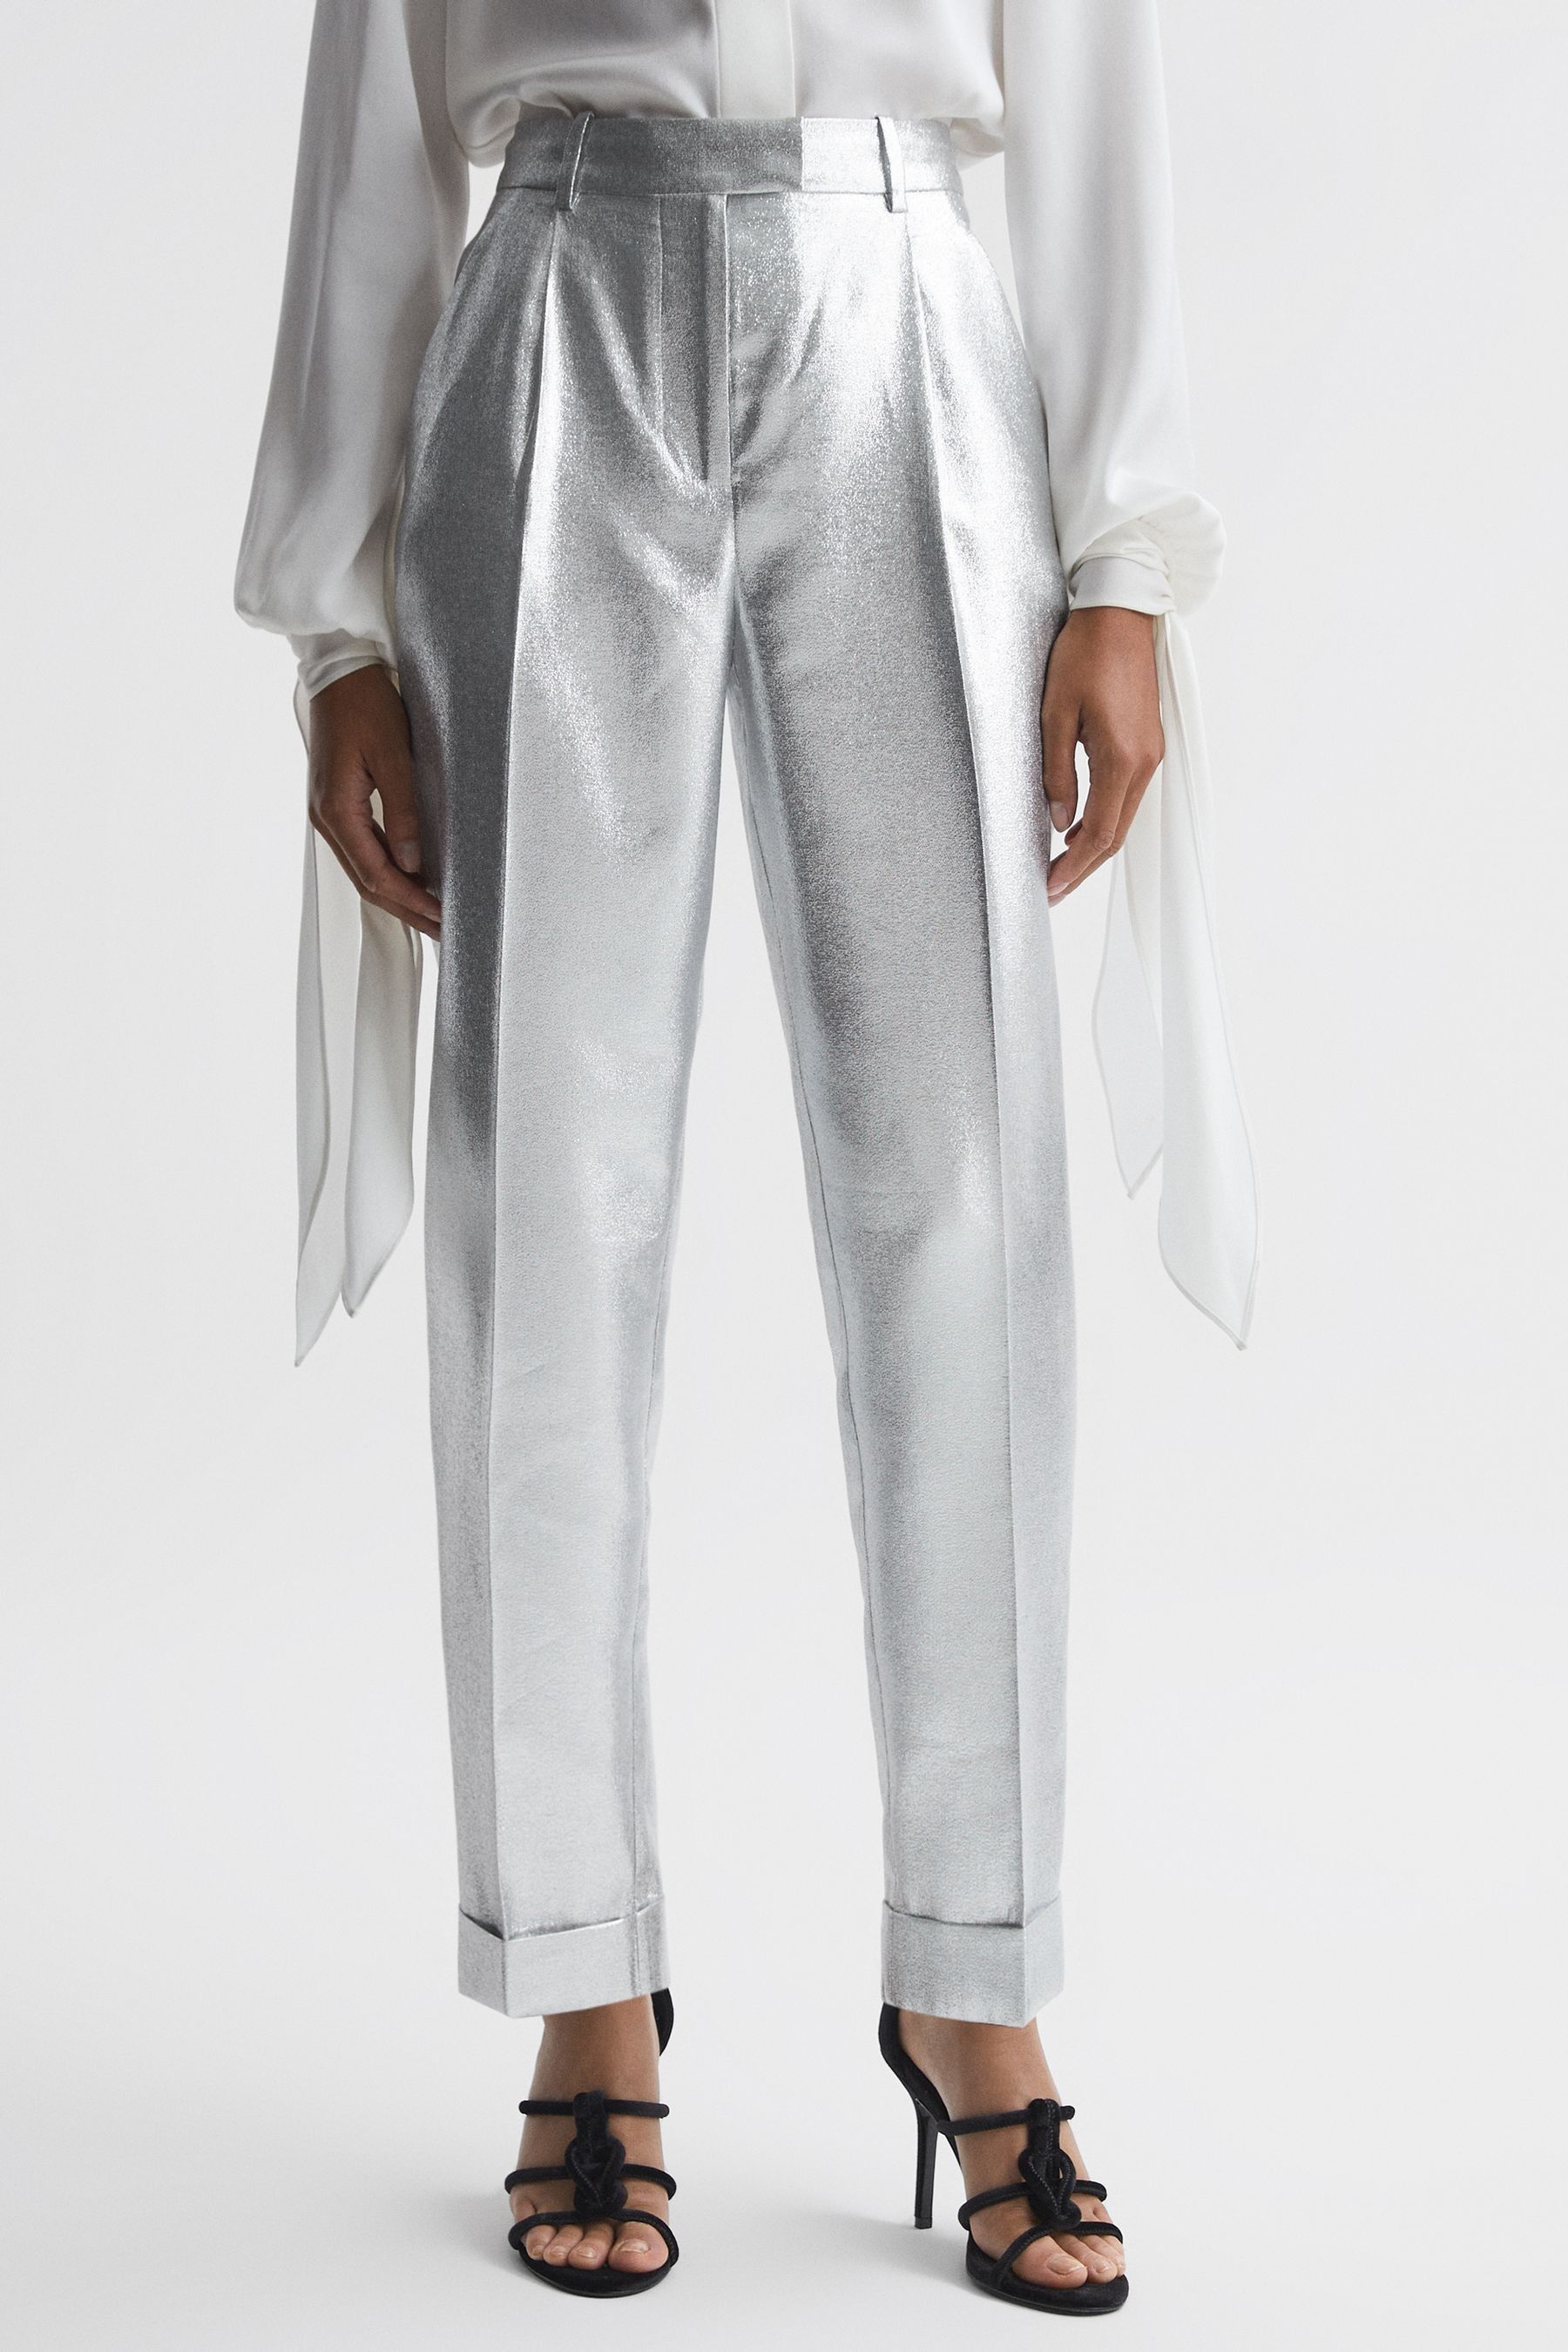 Reiss Sierra - Silver Tapered Metallic Trousers With Turn-ups, Us 10